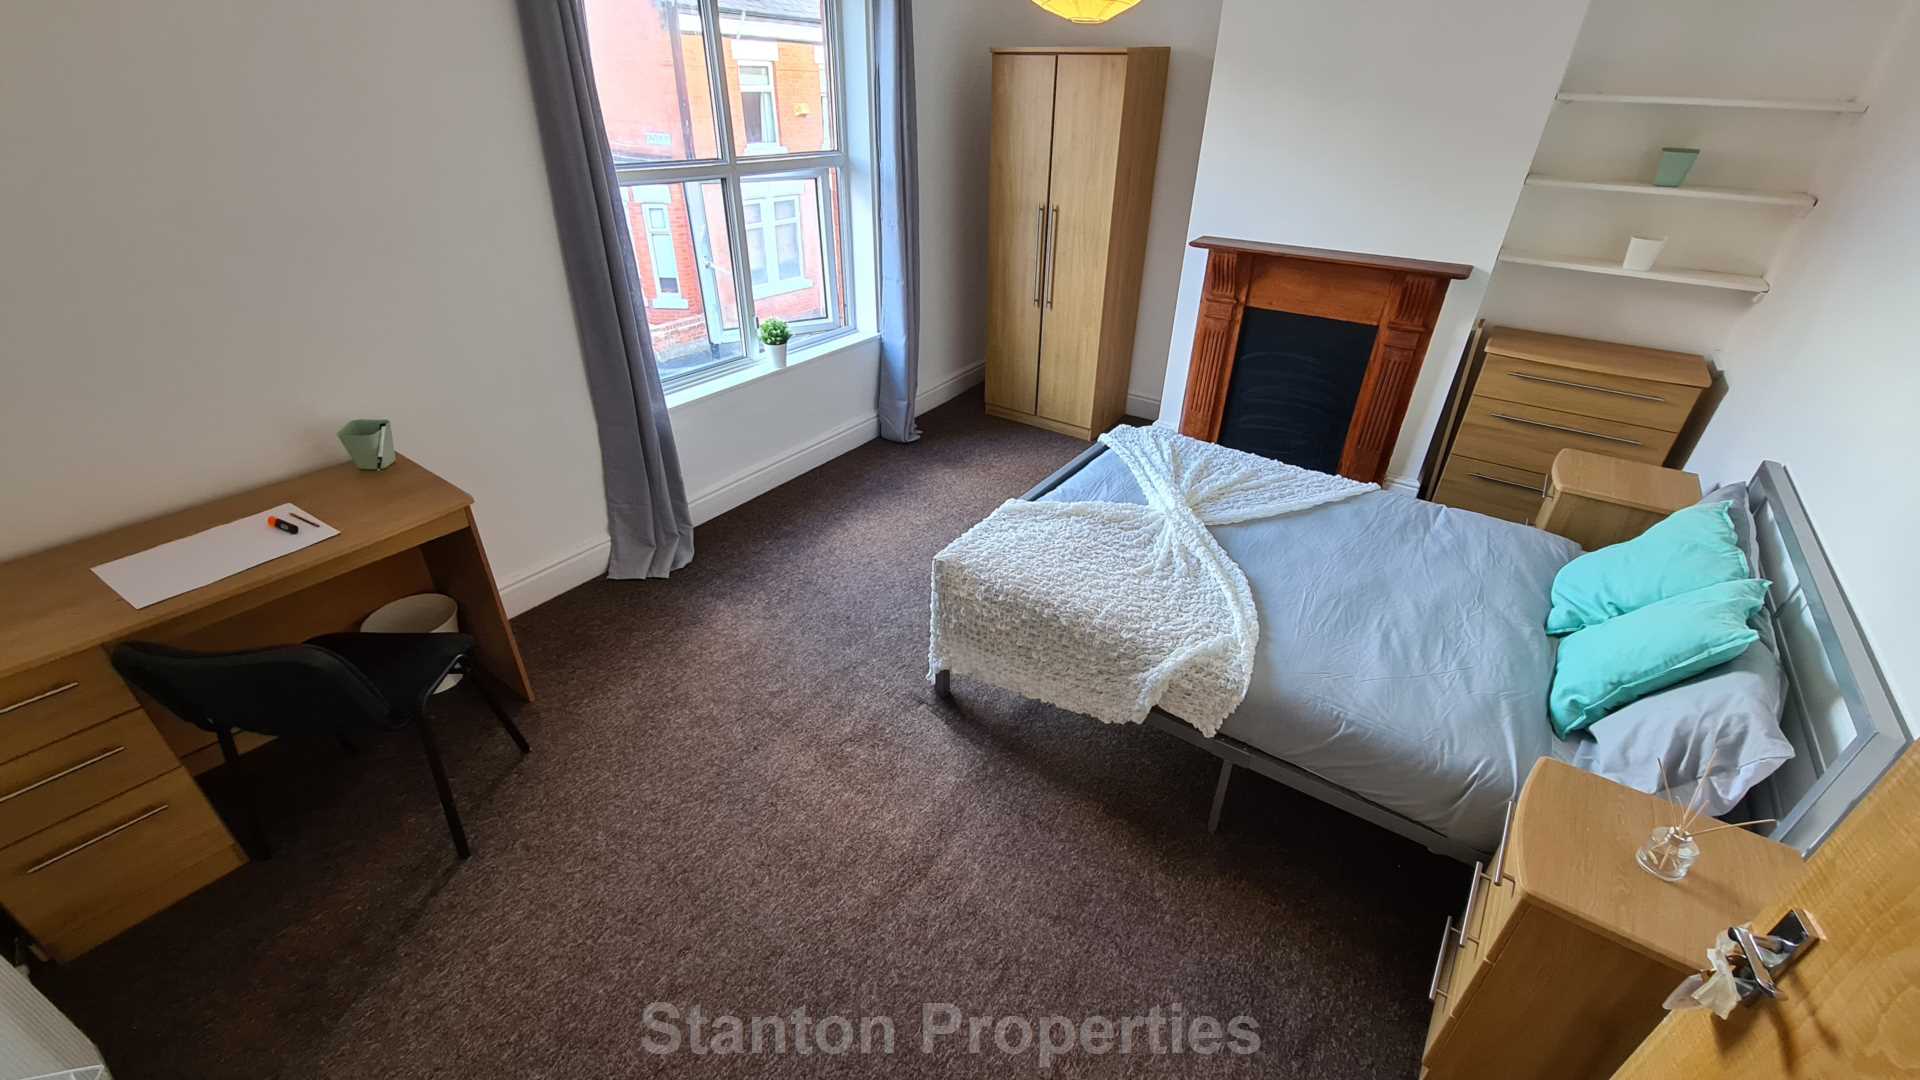 See Video Tour, £130 pppw, Albion Road, Manchester, Image 7